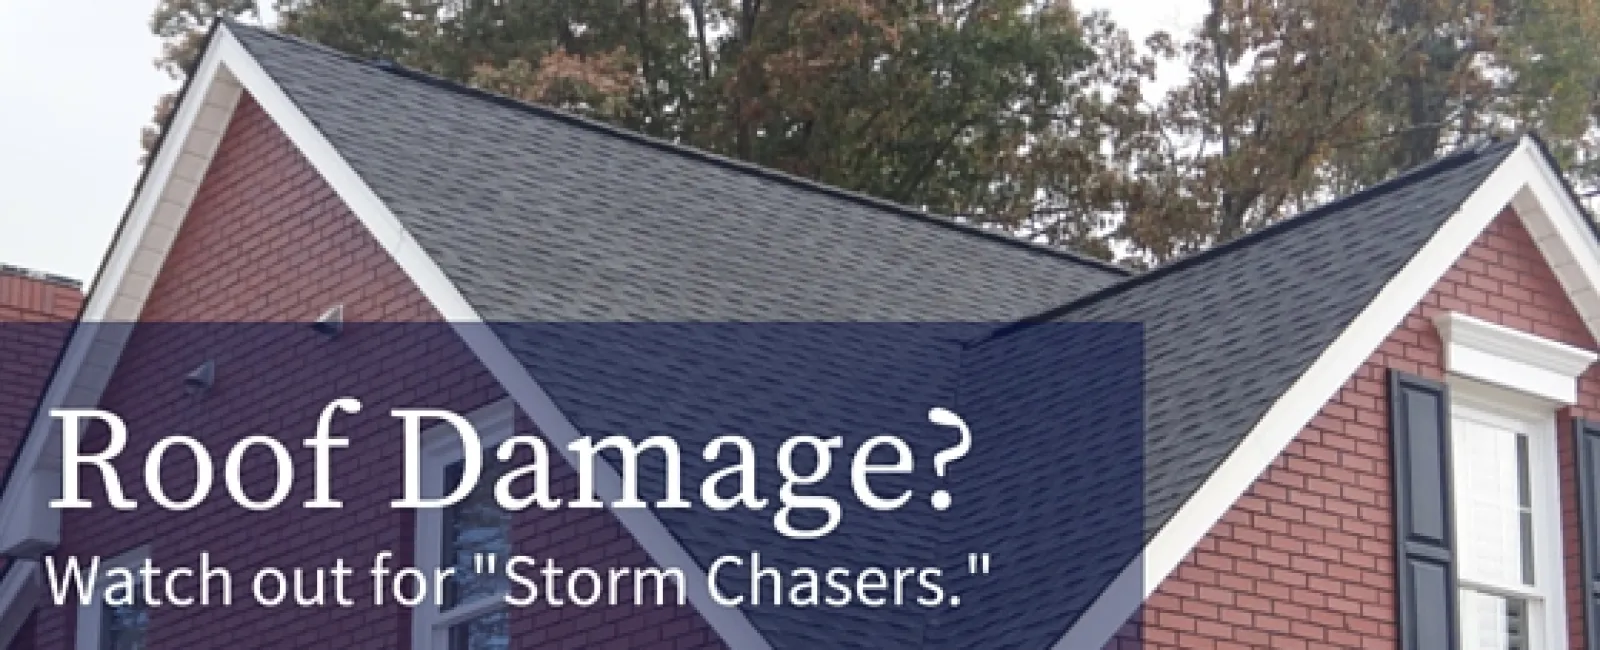 Roof Damage? Don’t Fall Prey to Storm Chasers